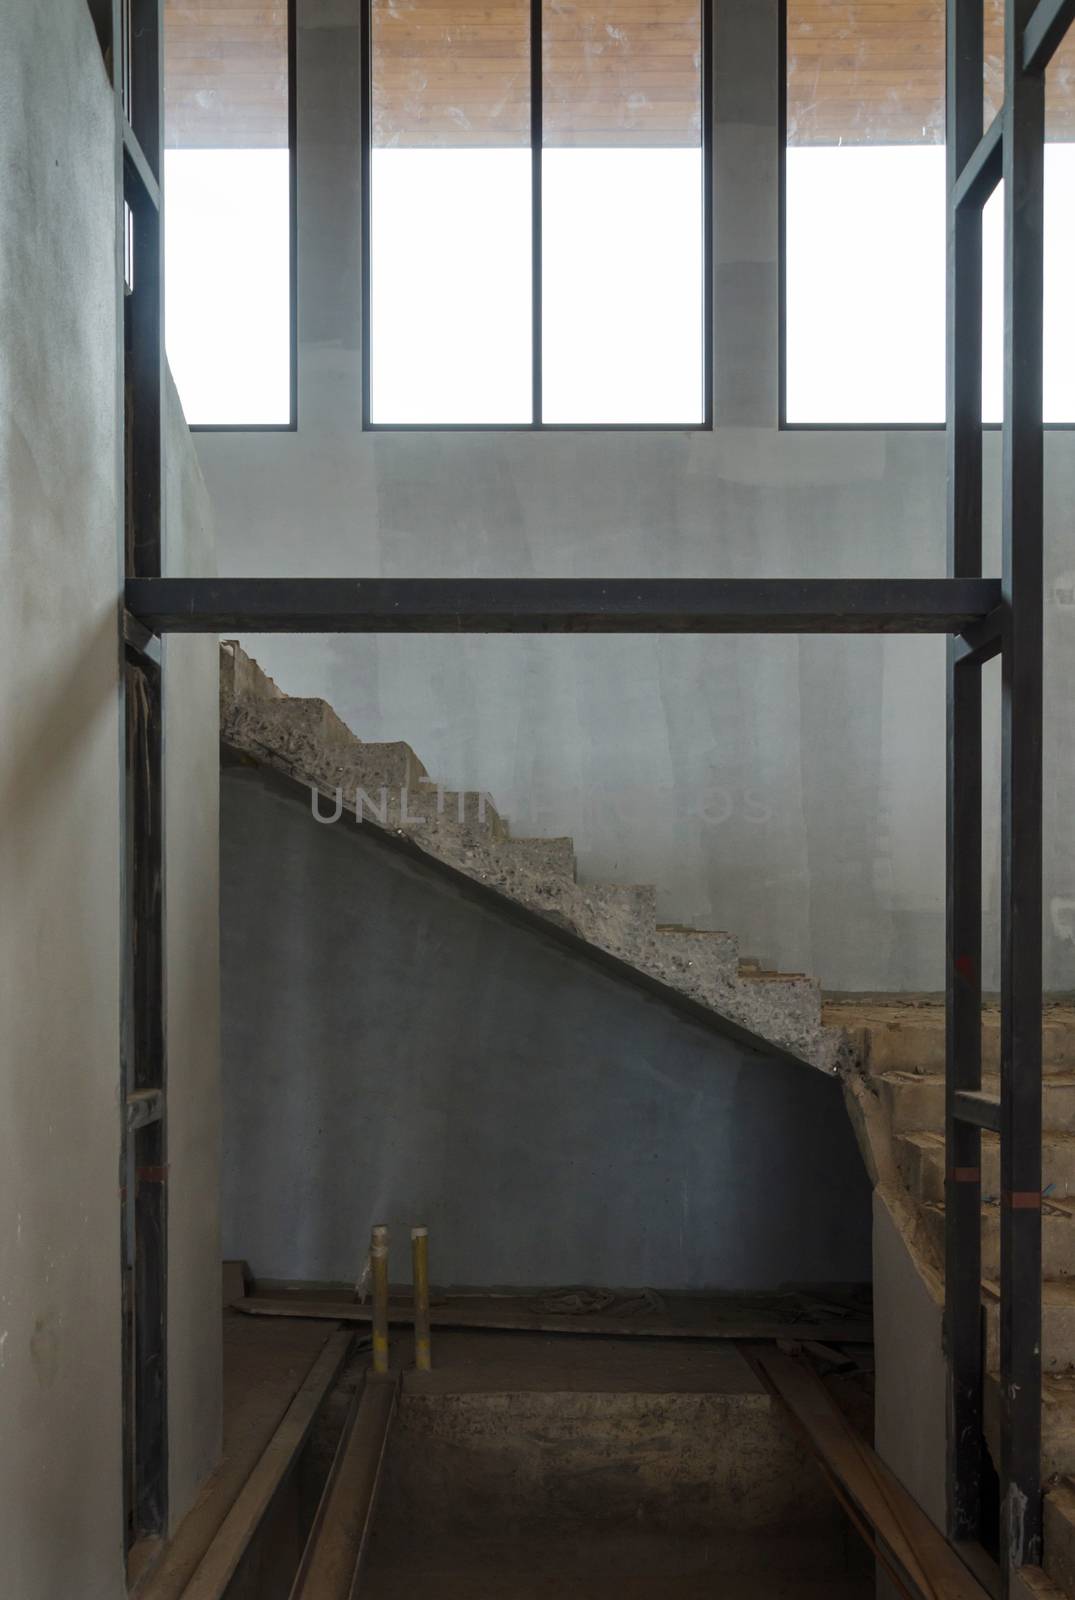 Staircase in the house under construction  by siraanamwong